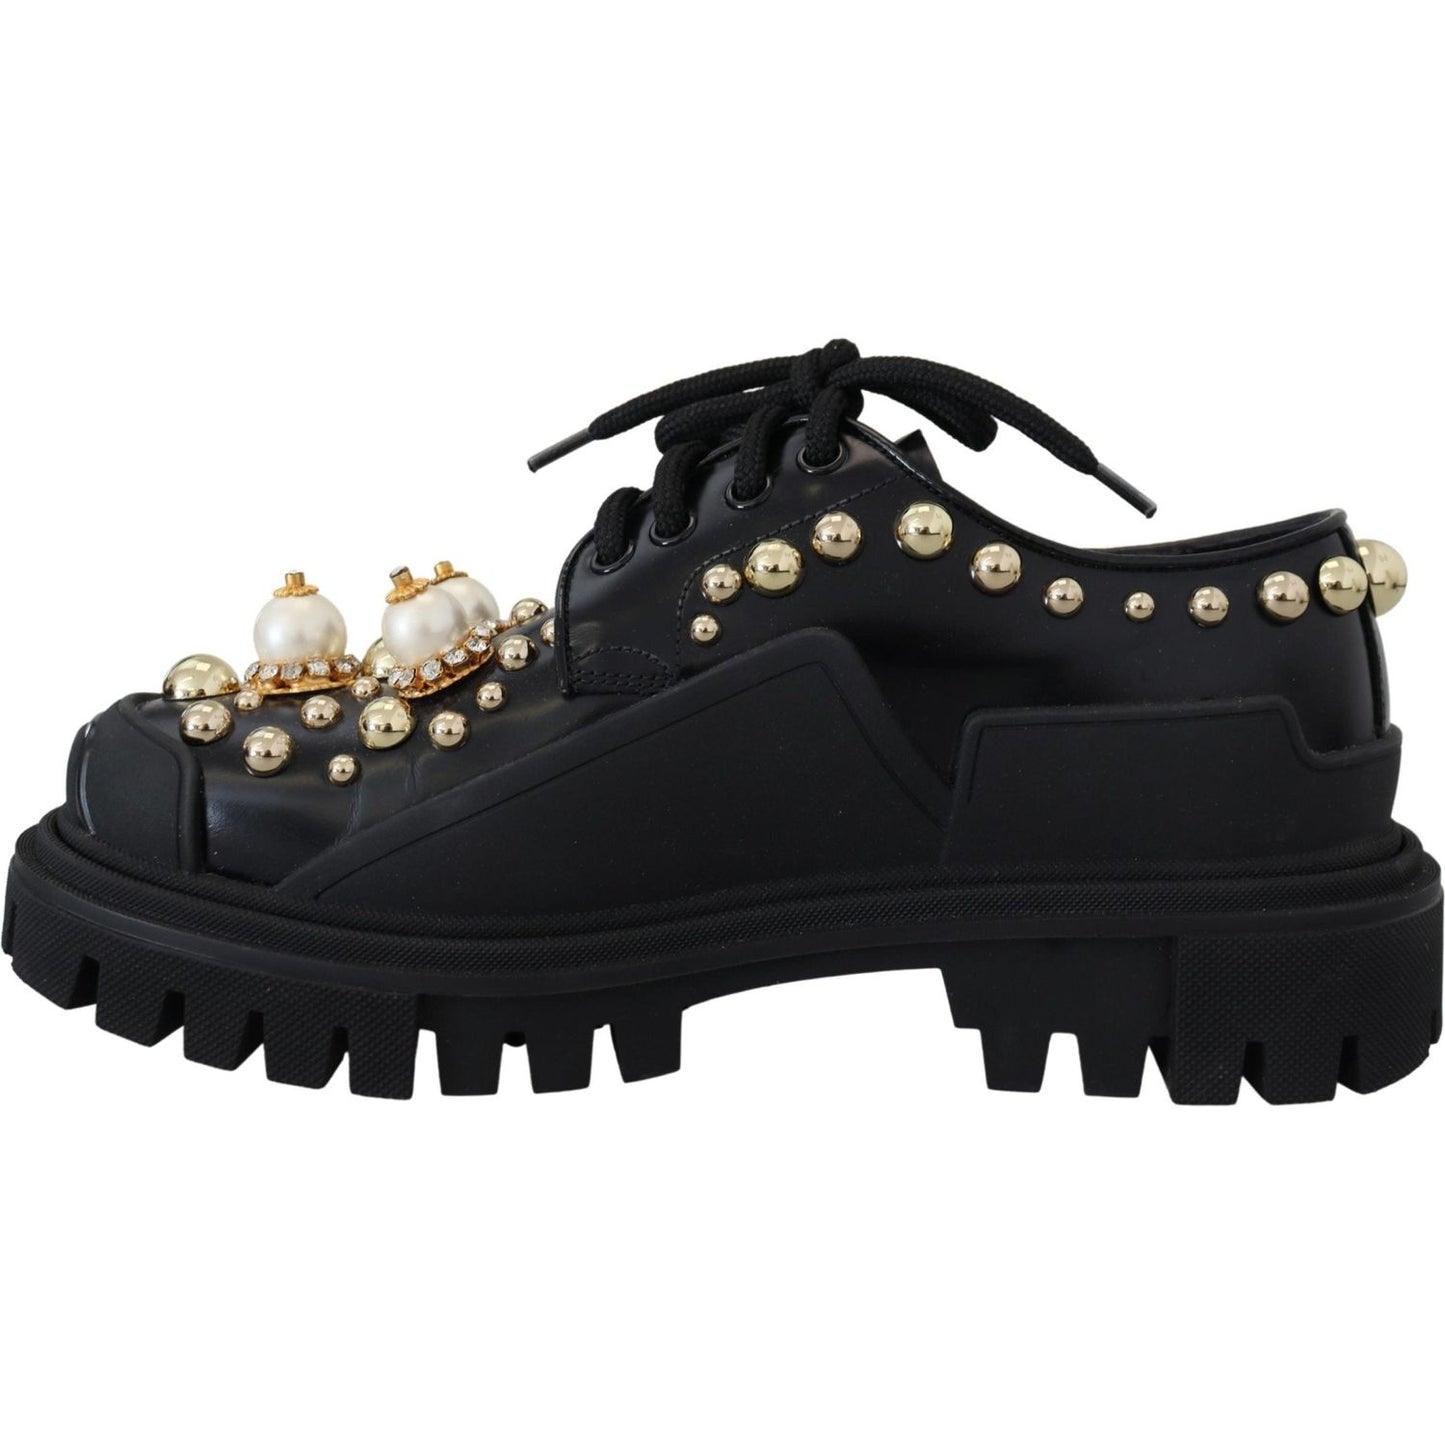 Dolce & Gabbana Timeless Black Leather Derby Flats with Glam Accents black-leather-trekking-derby-embellished-shoes